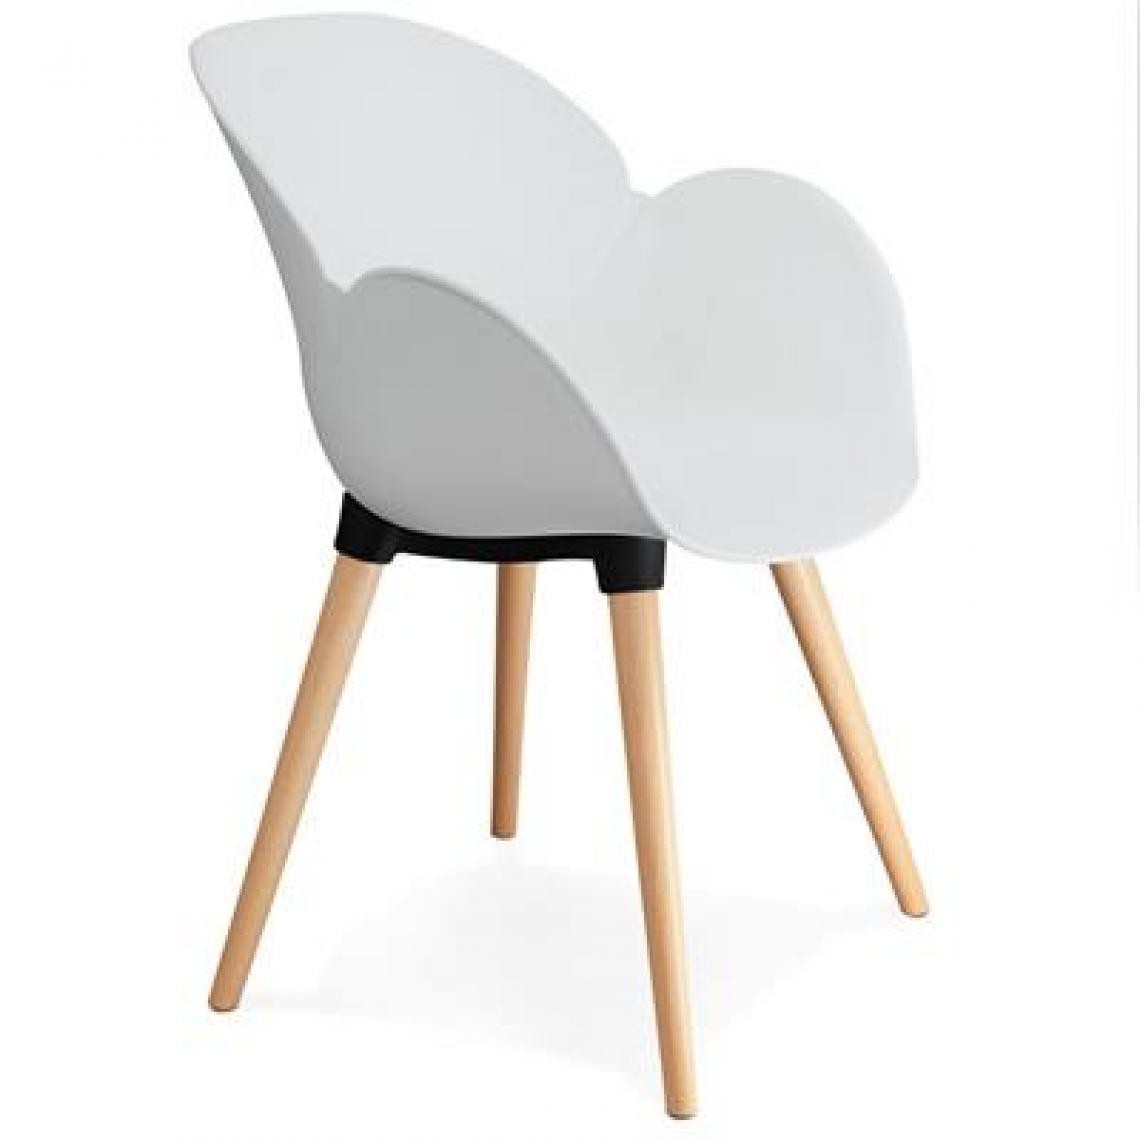 Nouvomeuble - Chaise blanche style scandinave ANGELA - Chaises